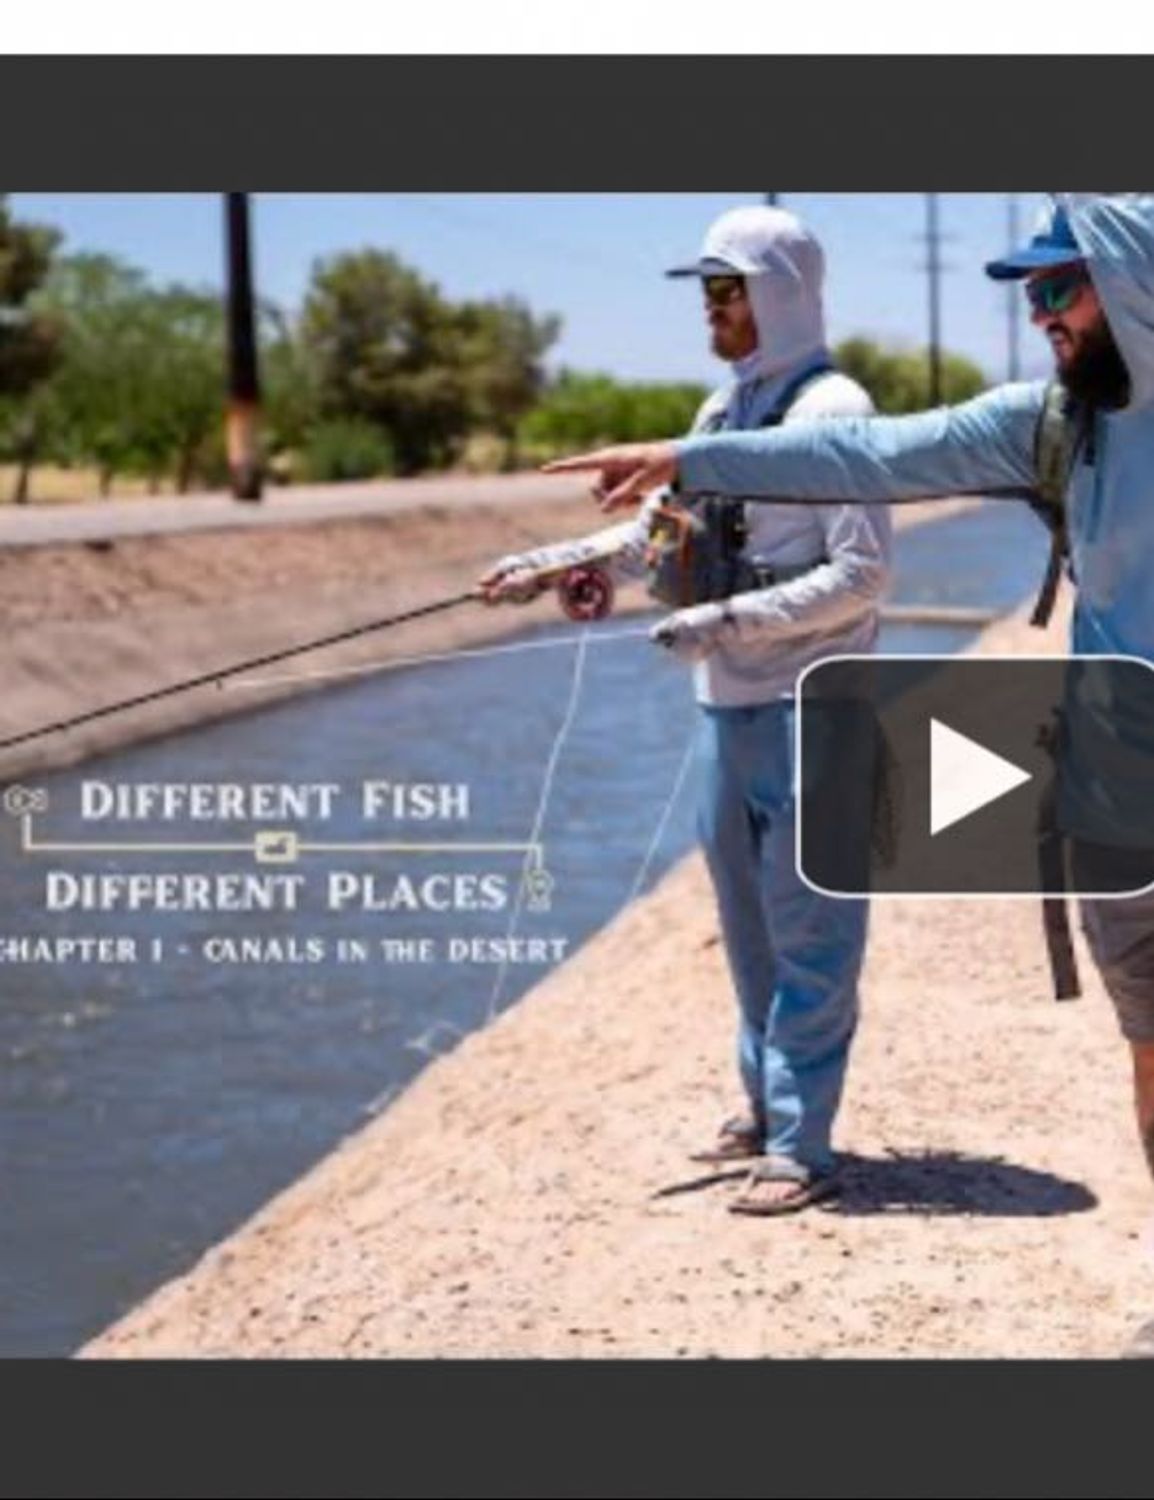 Why should I hire Lo Water Guide Service for a fly fishing guide when visiting Phoenix, Arizona?